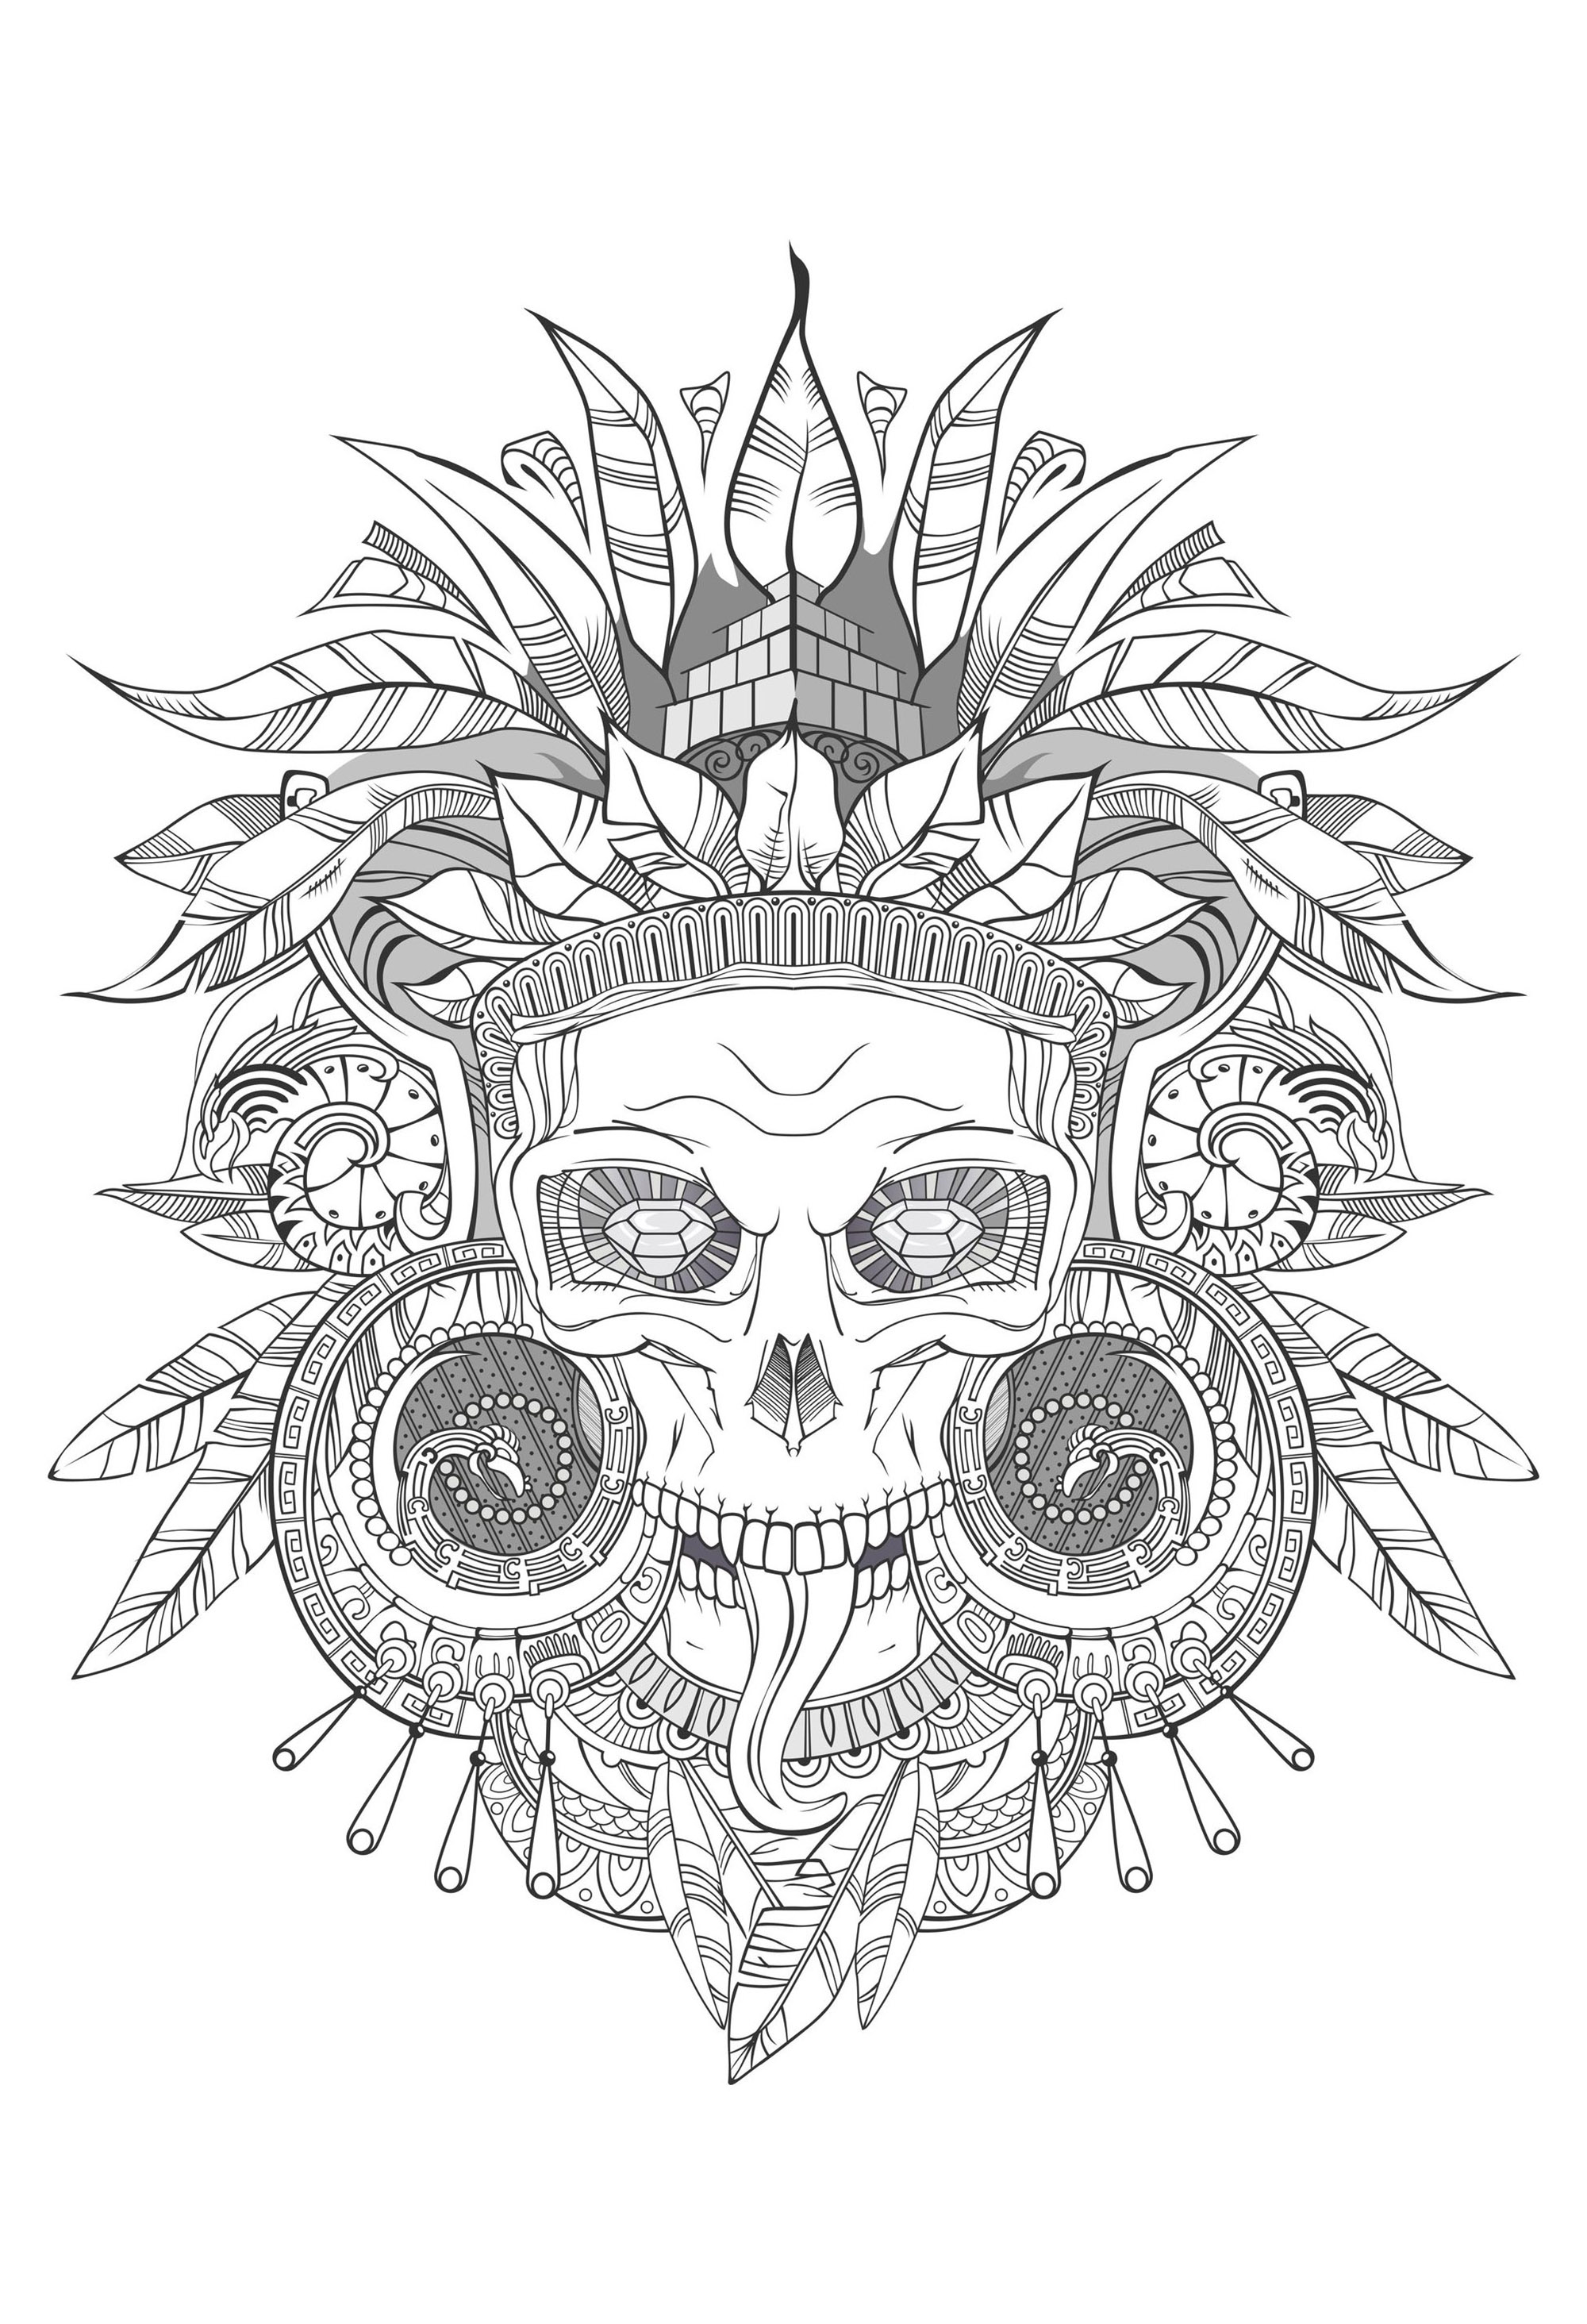 Aztec skull shades of grey - Mayans & Incas Adult Coloring Pages